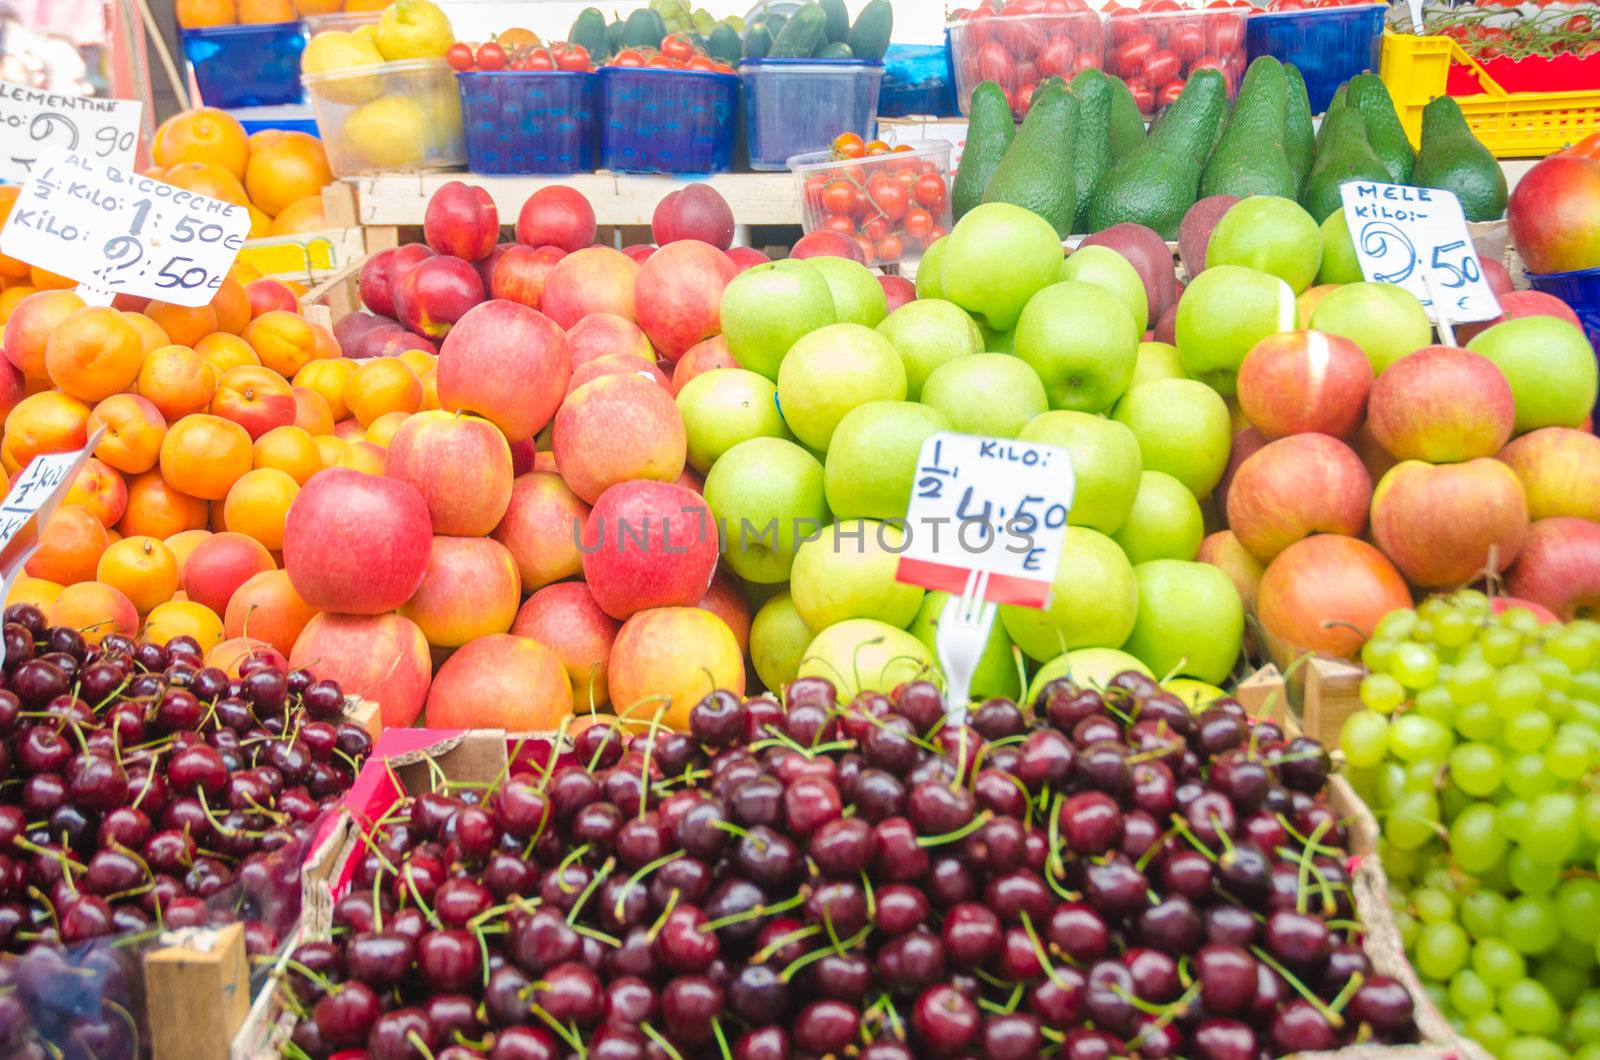 Fruits and vegetables at the market stall by Elnur